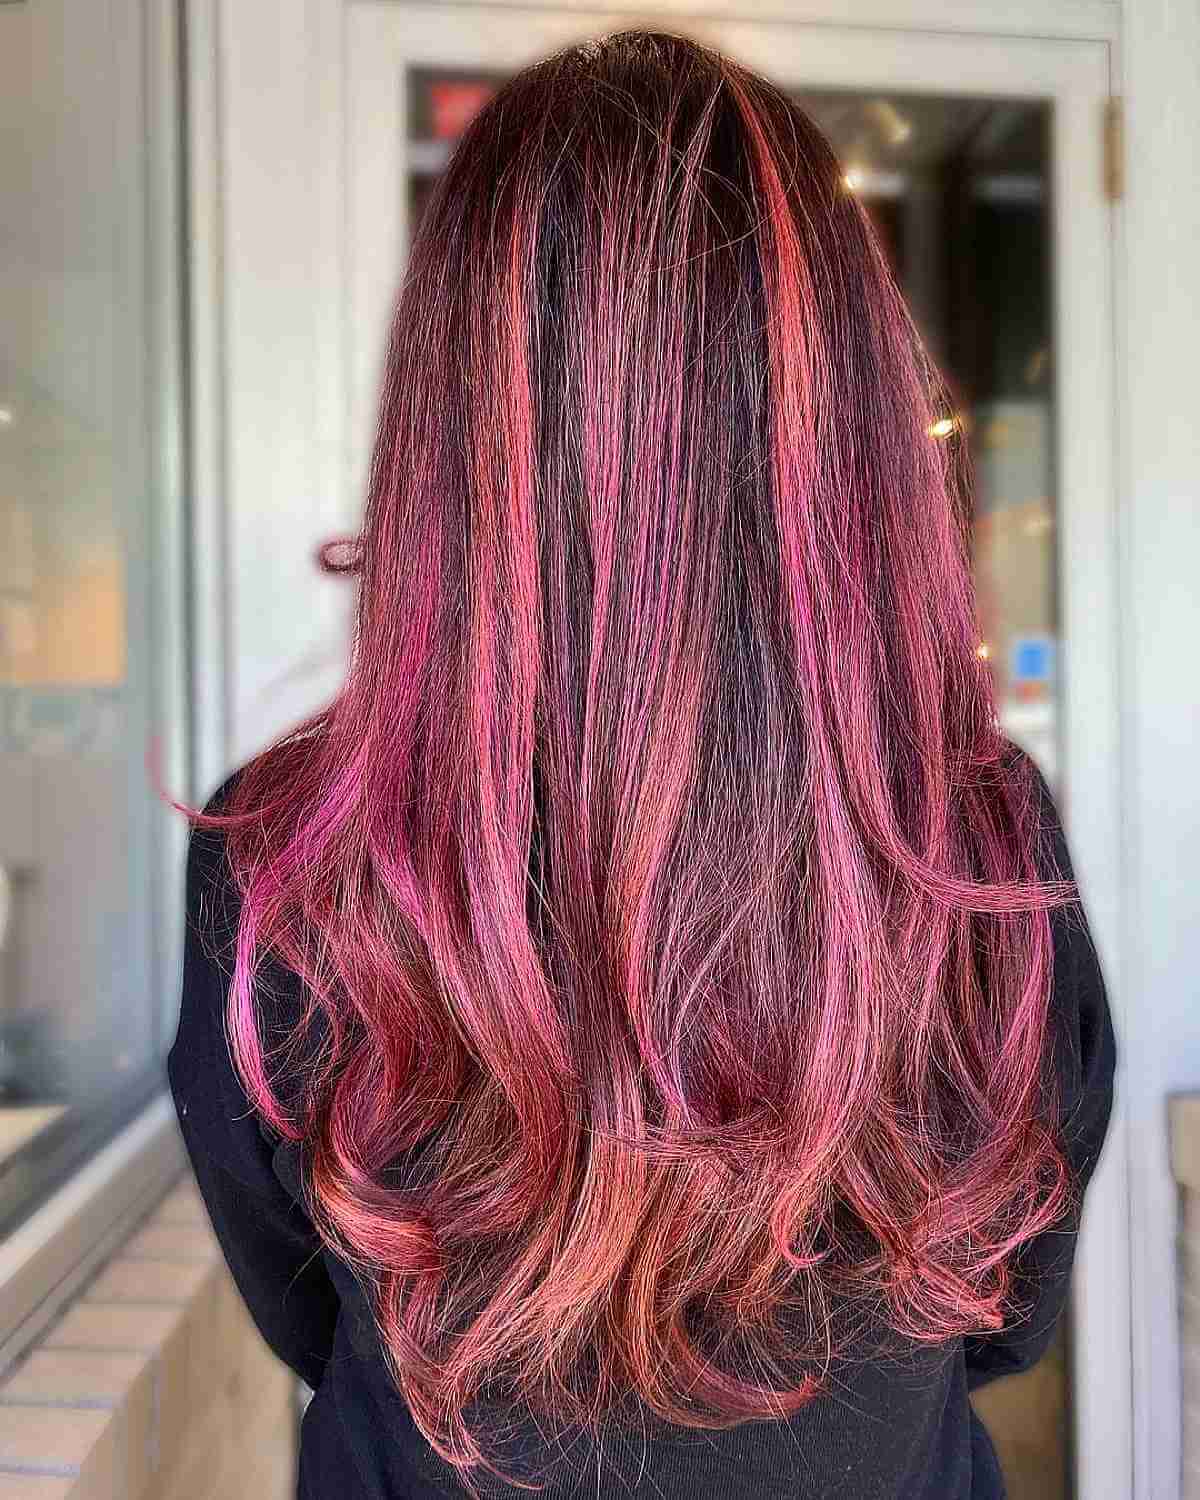 Pink Balayage: 21 Photos That Will Inspire You To Try This Hair Color Next